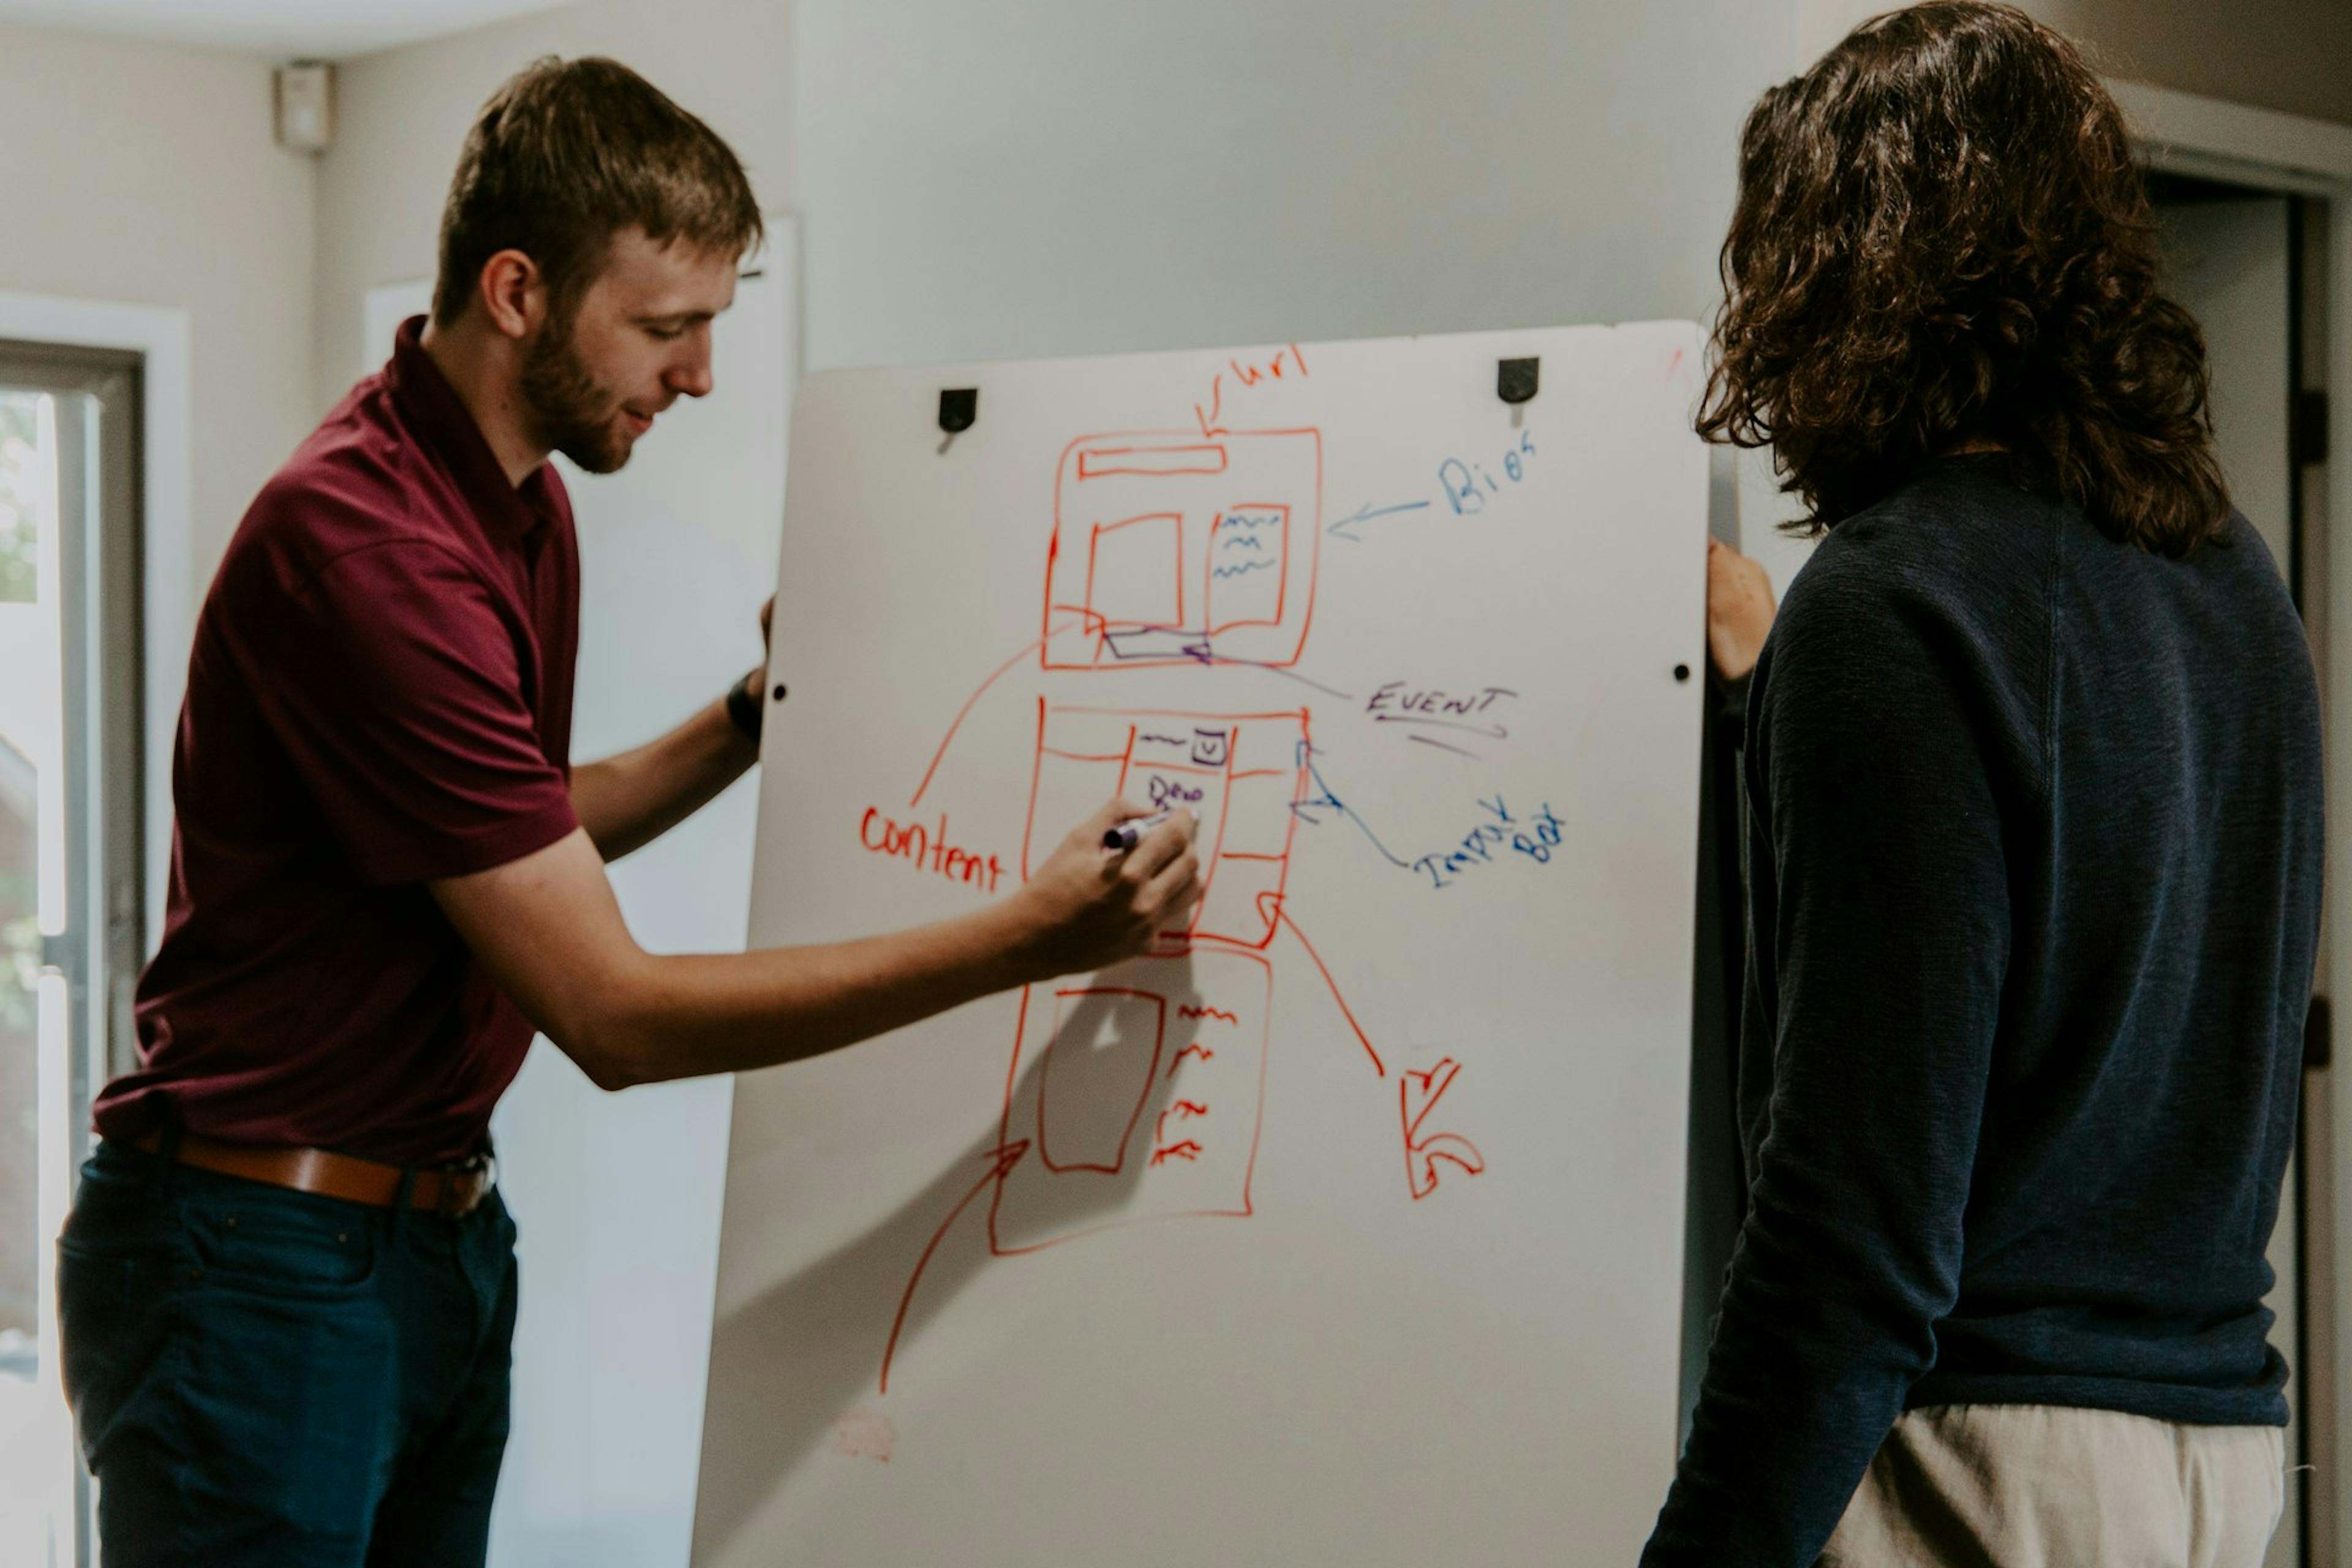 Two people collaborating on a content model visualization on a whiteboard.